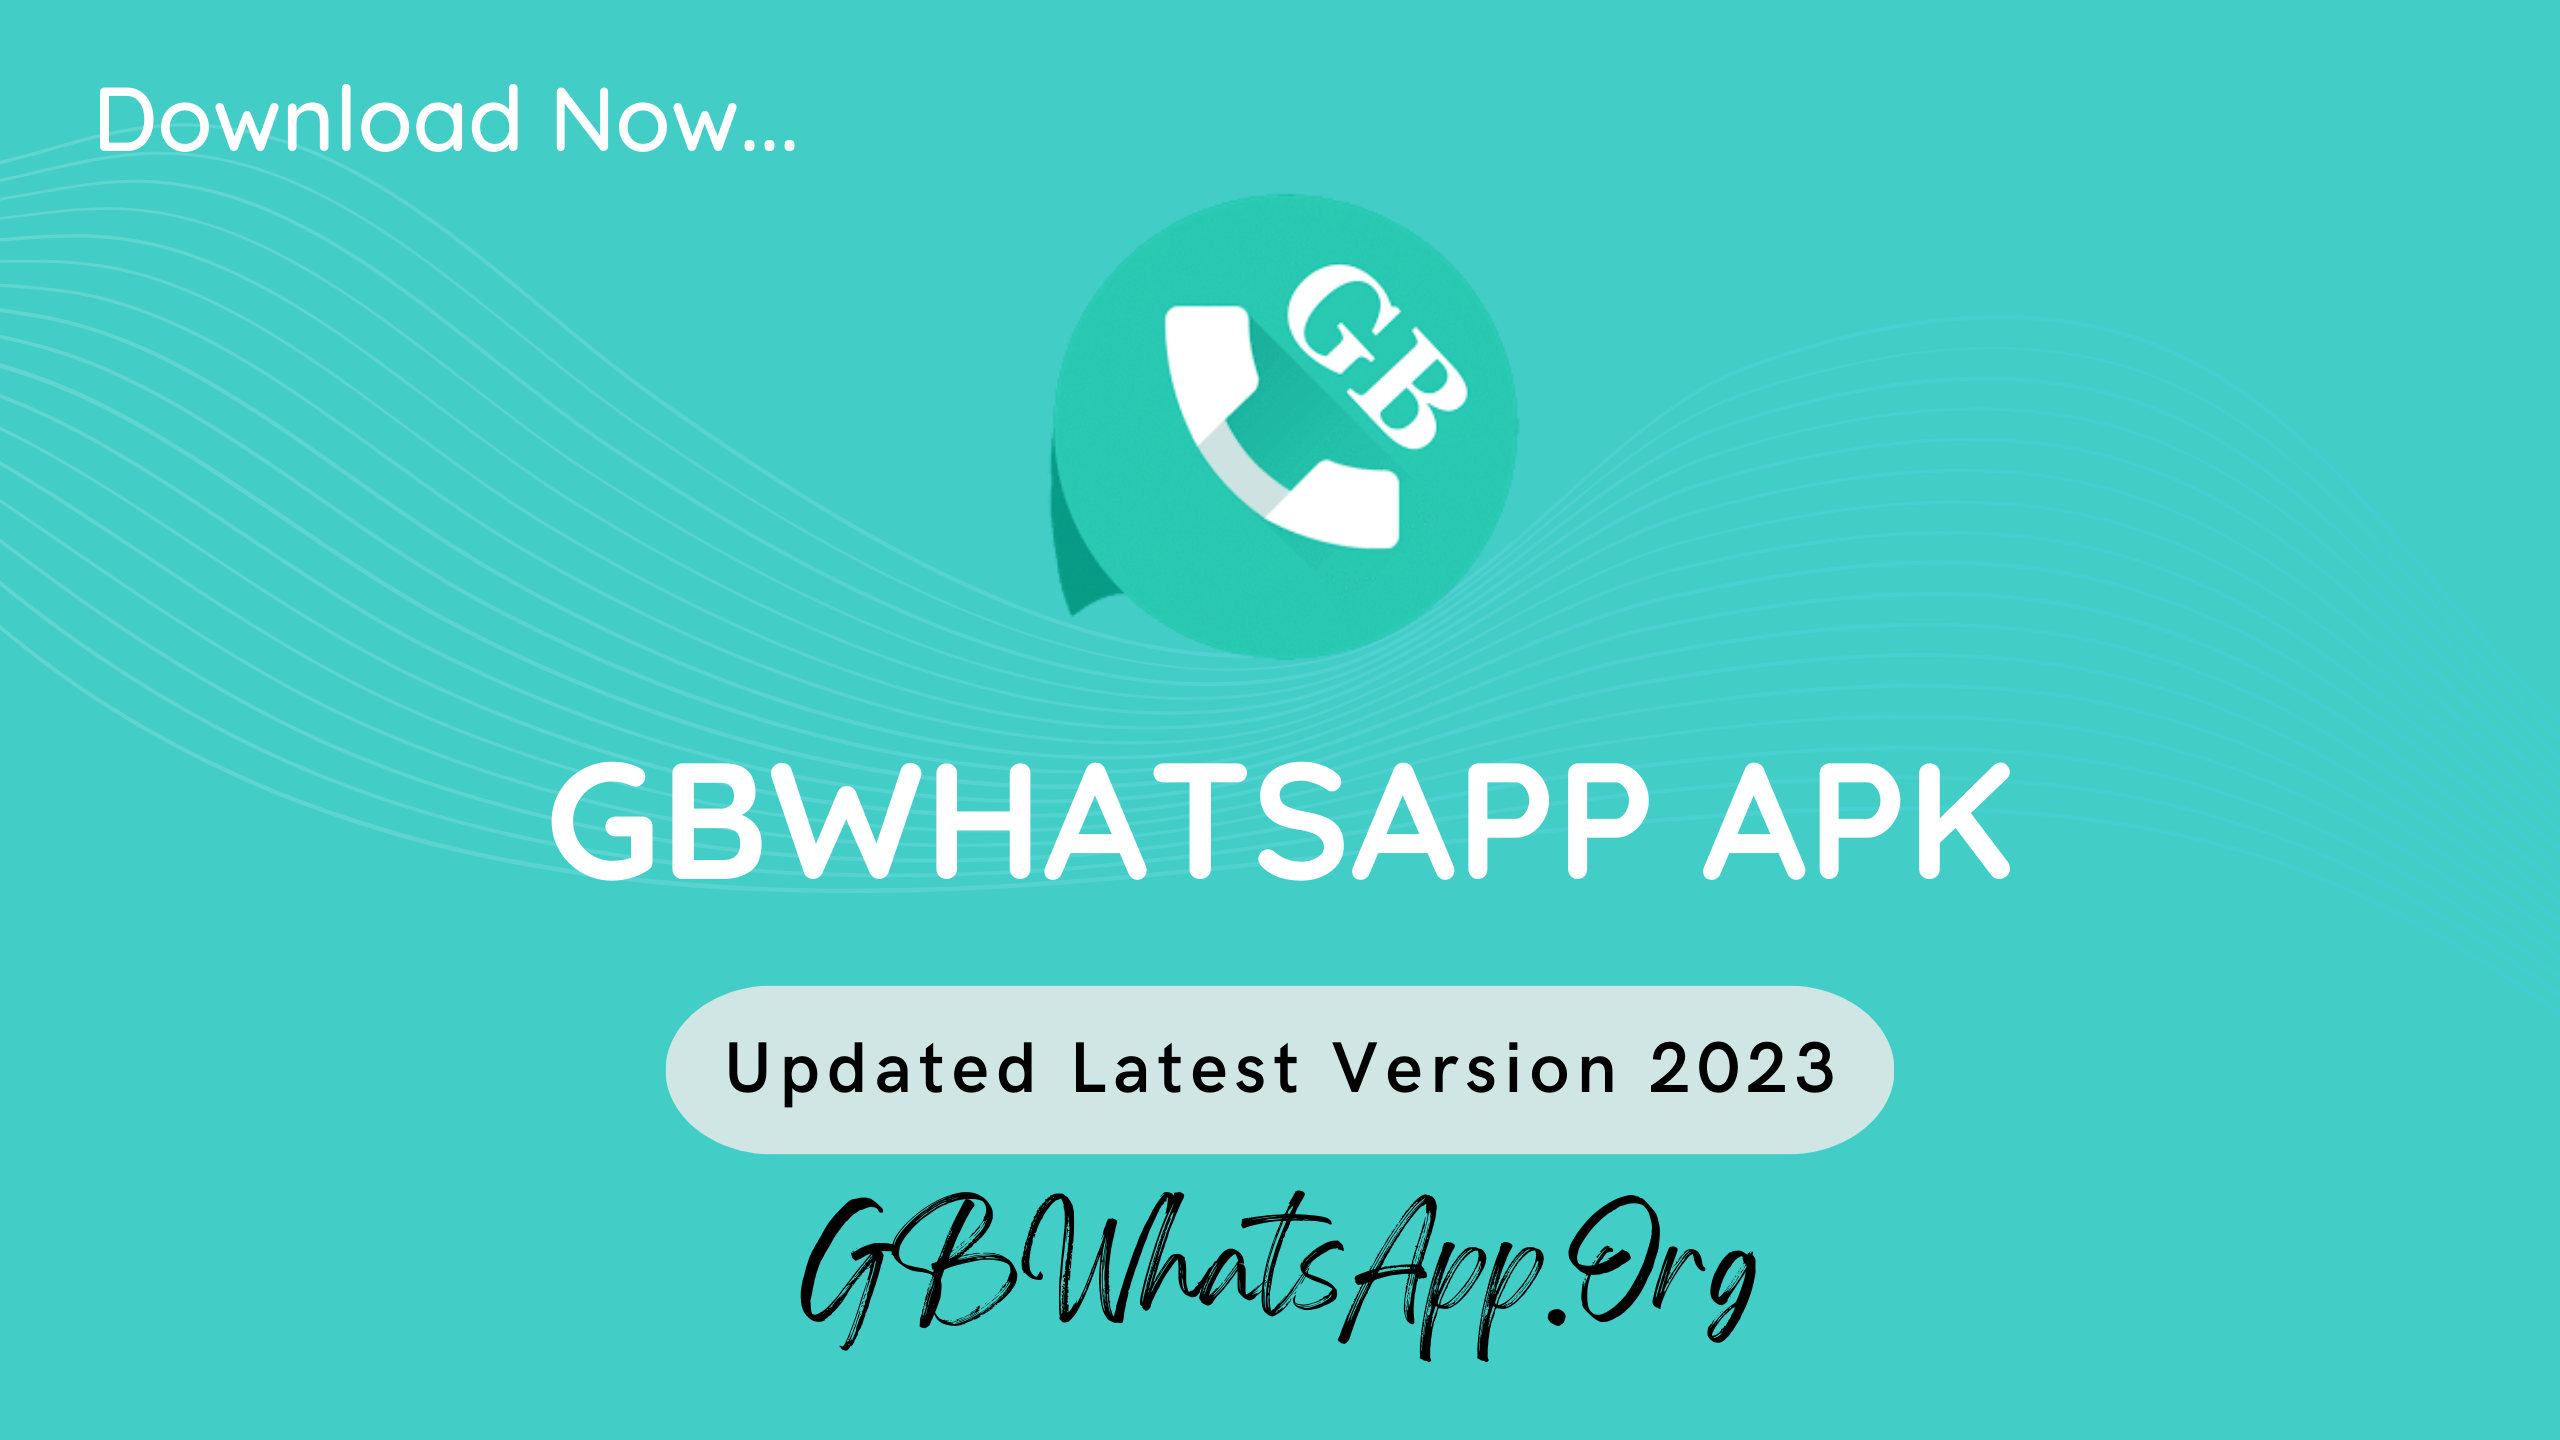 GBWhatsApp APK Download (Anti-Ban) Updated April 2023 | OFFICIAL